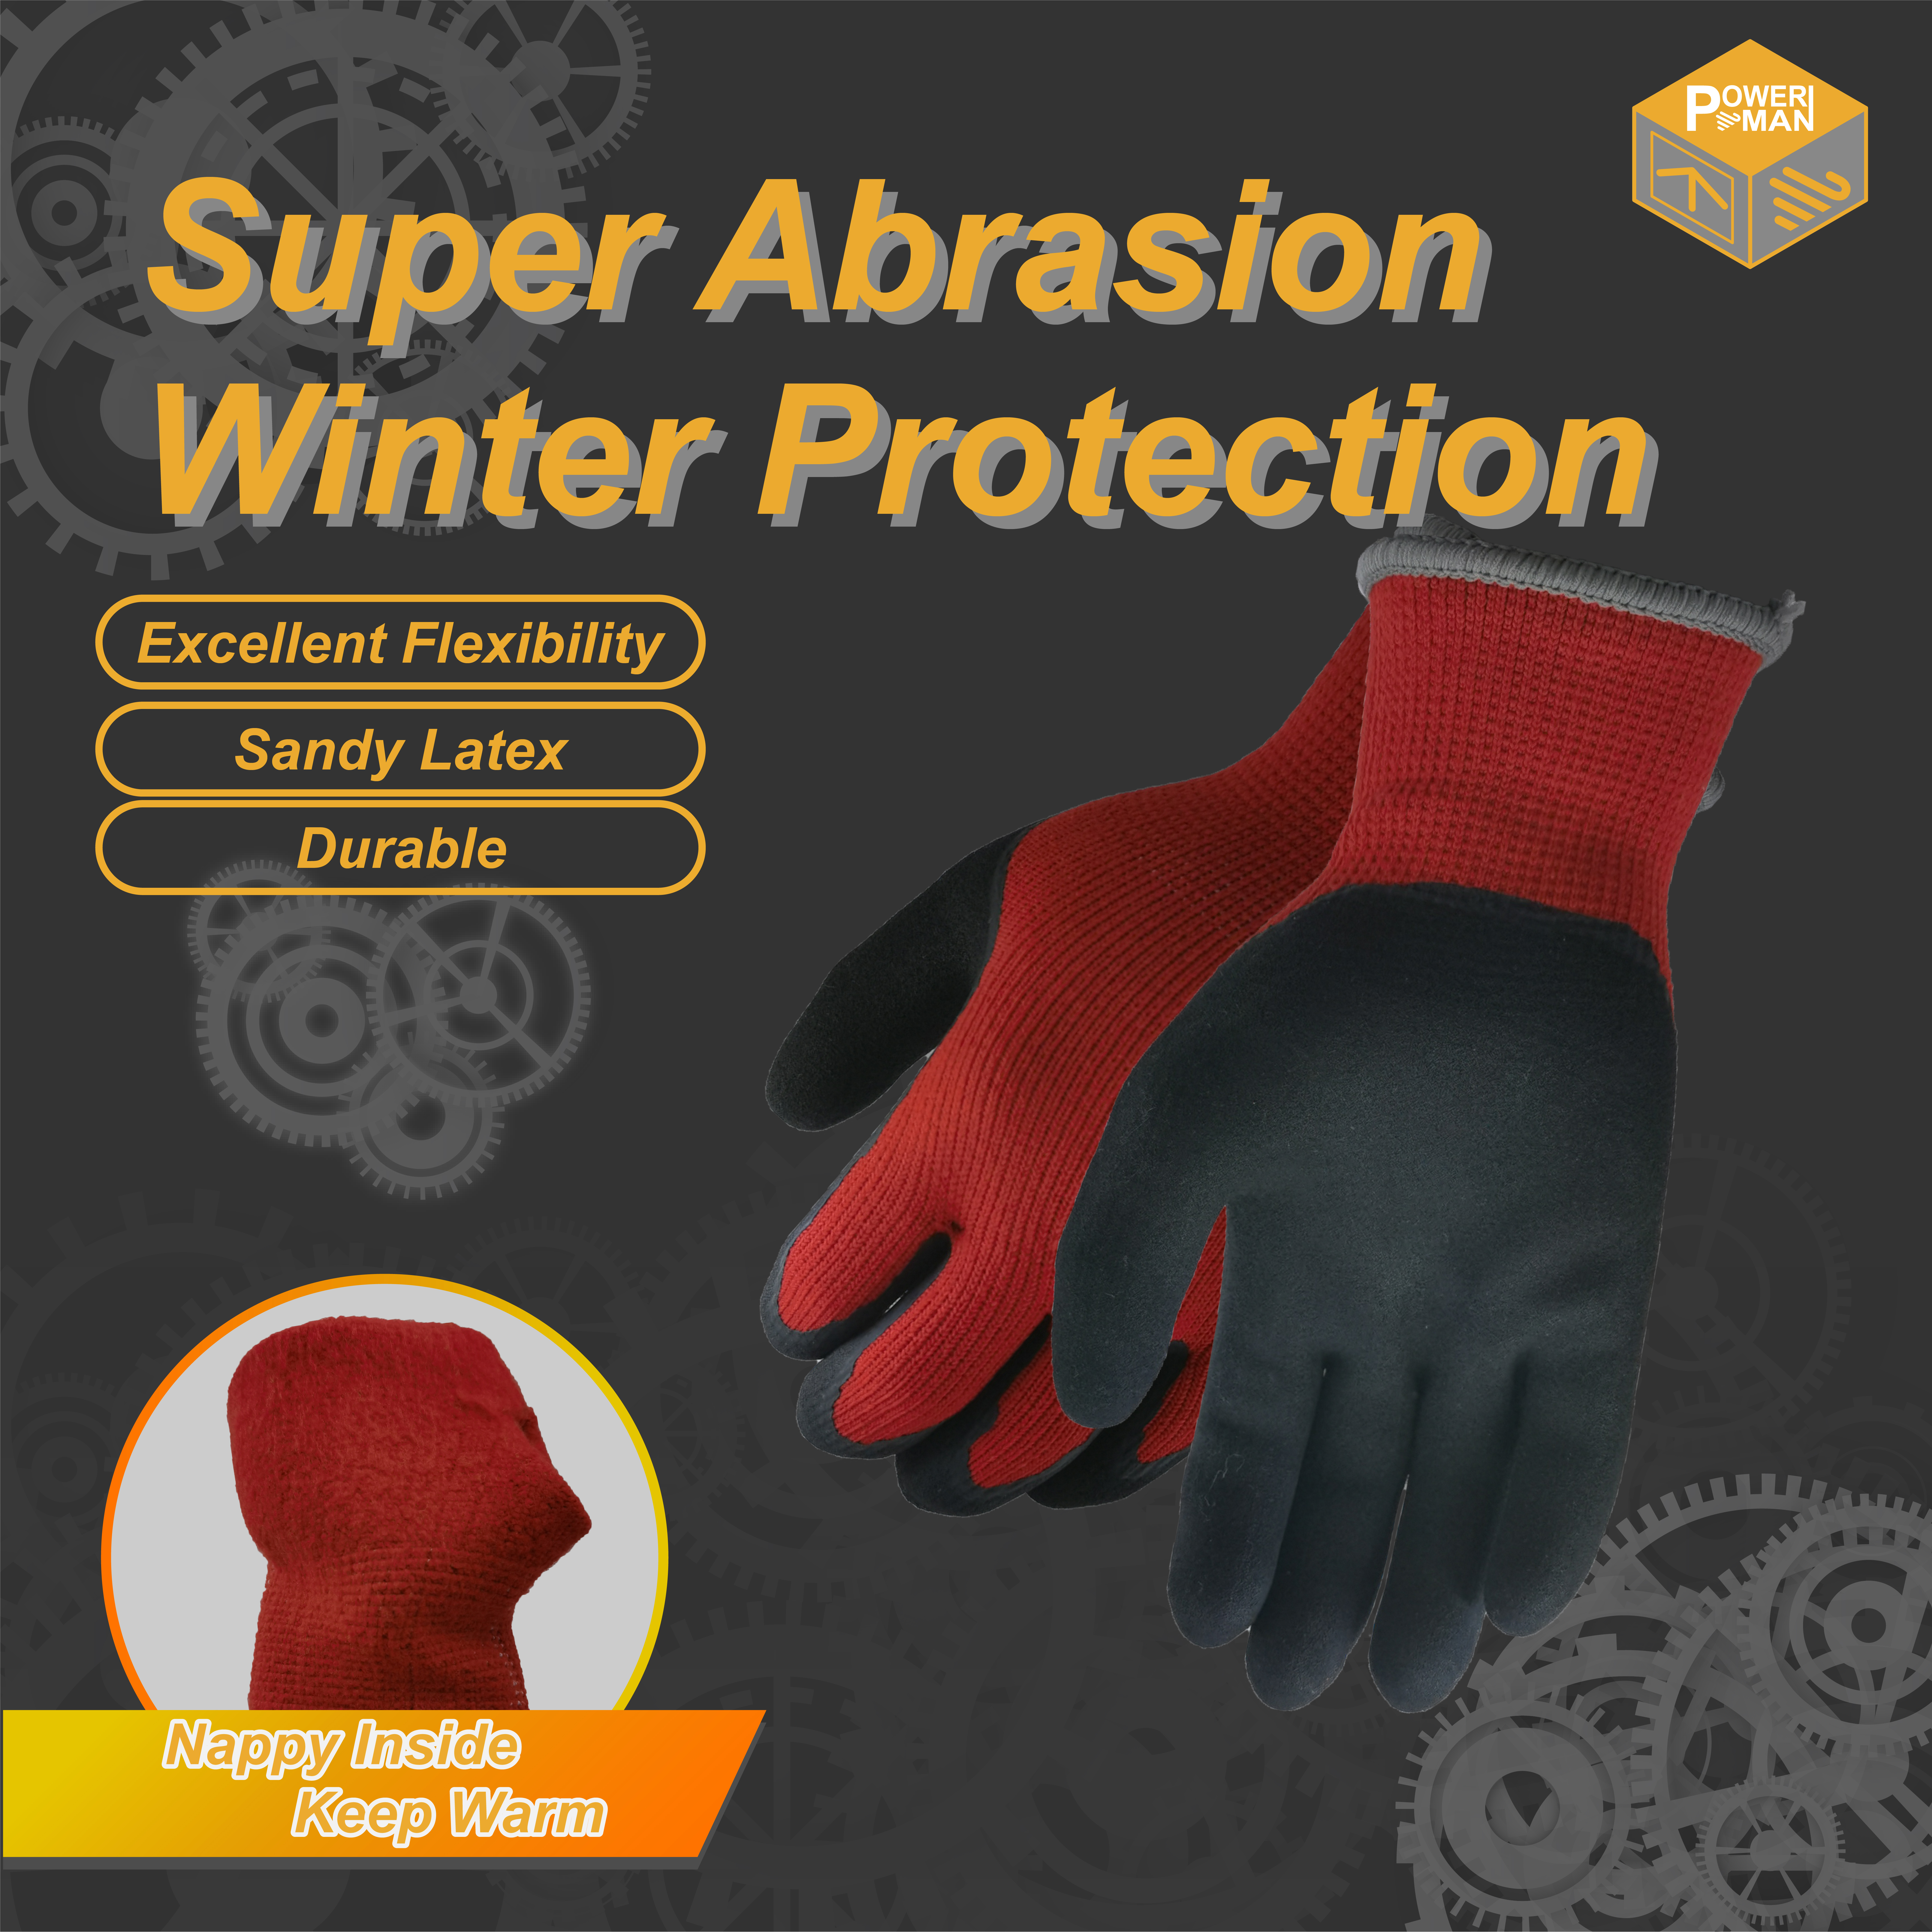 Powerman® Thermal Liner Gloves Protect Hands from Low Temperature Featured Image